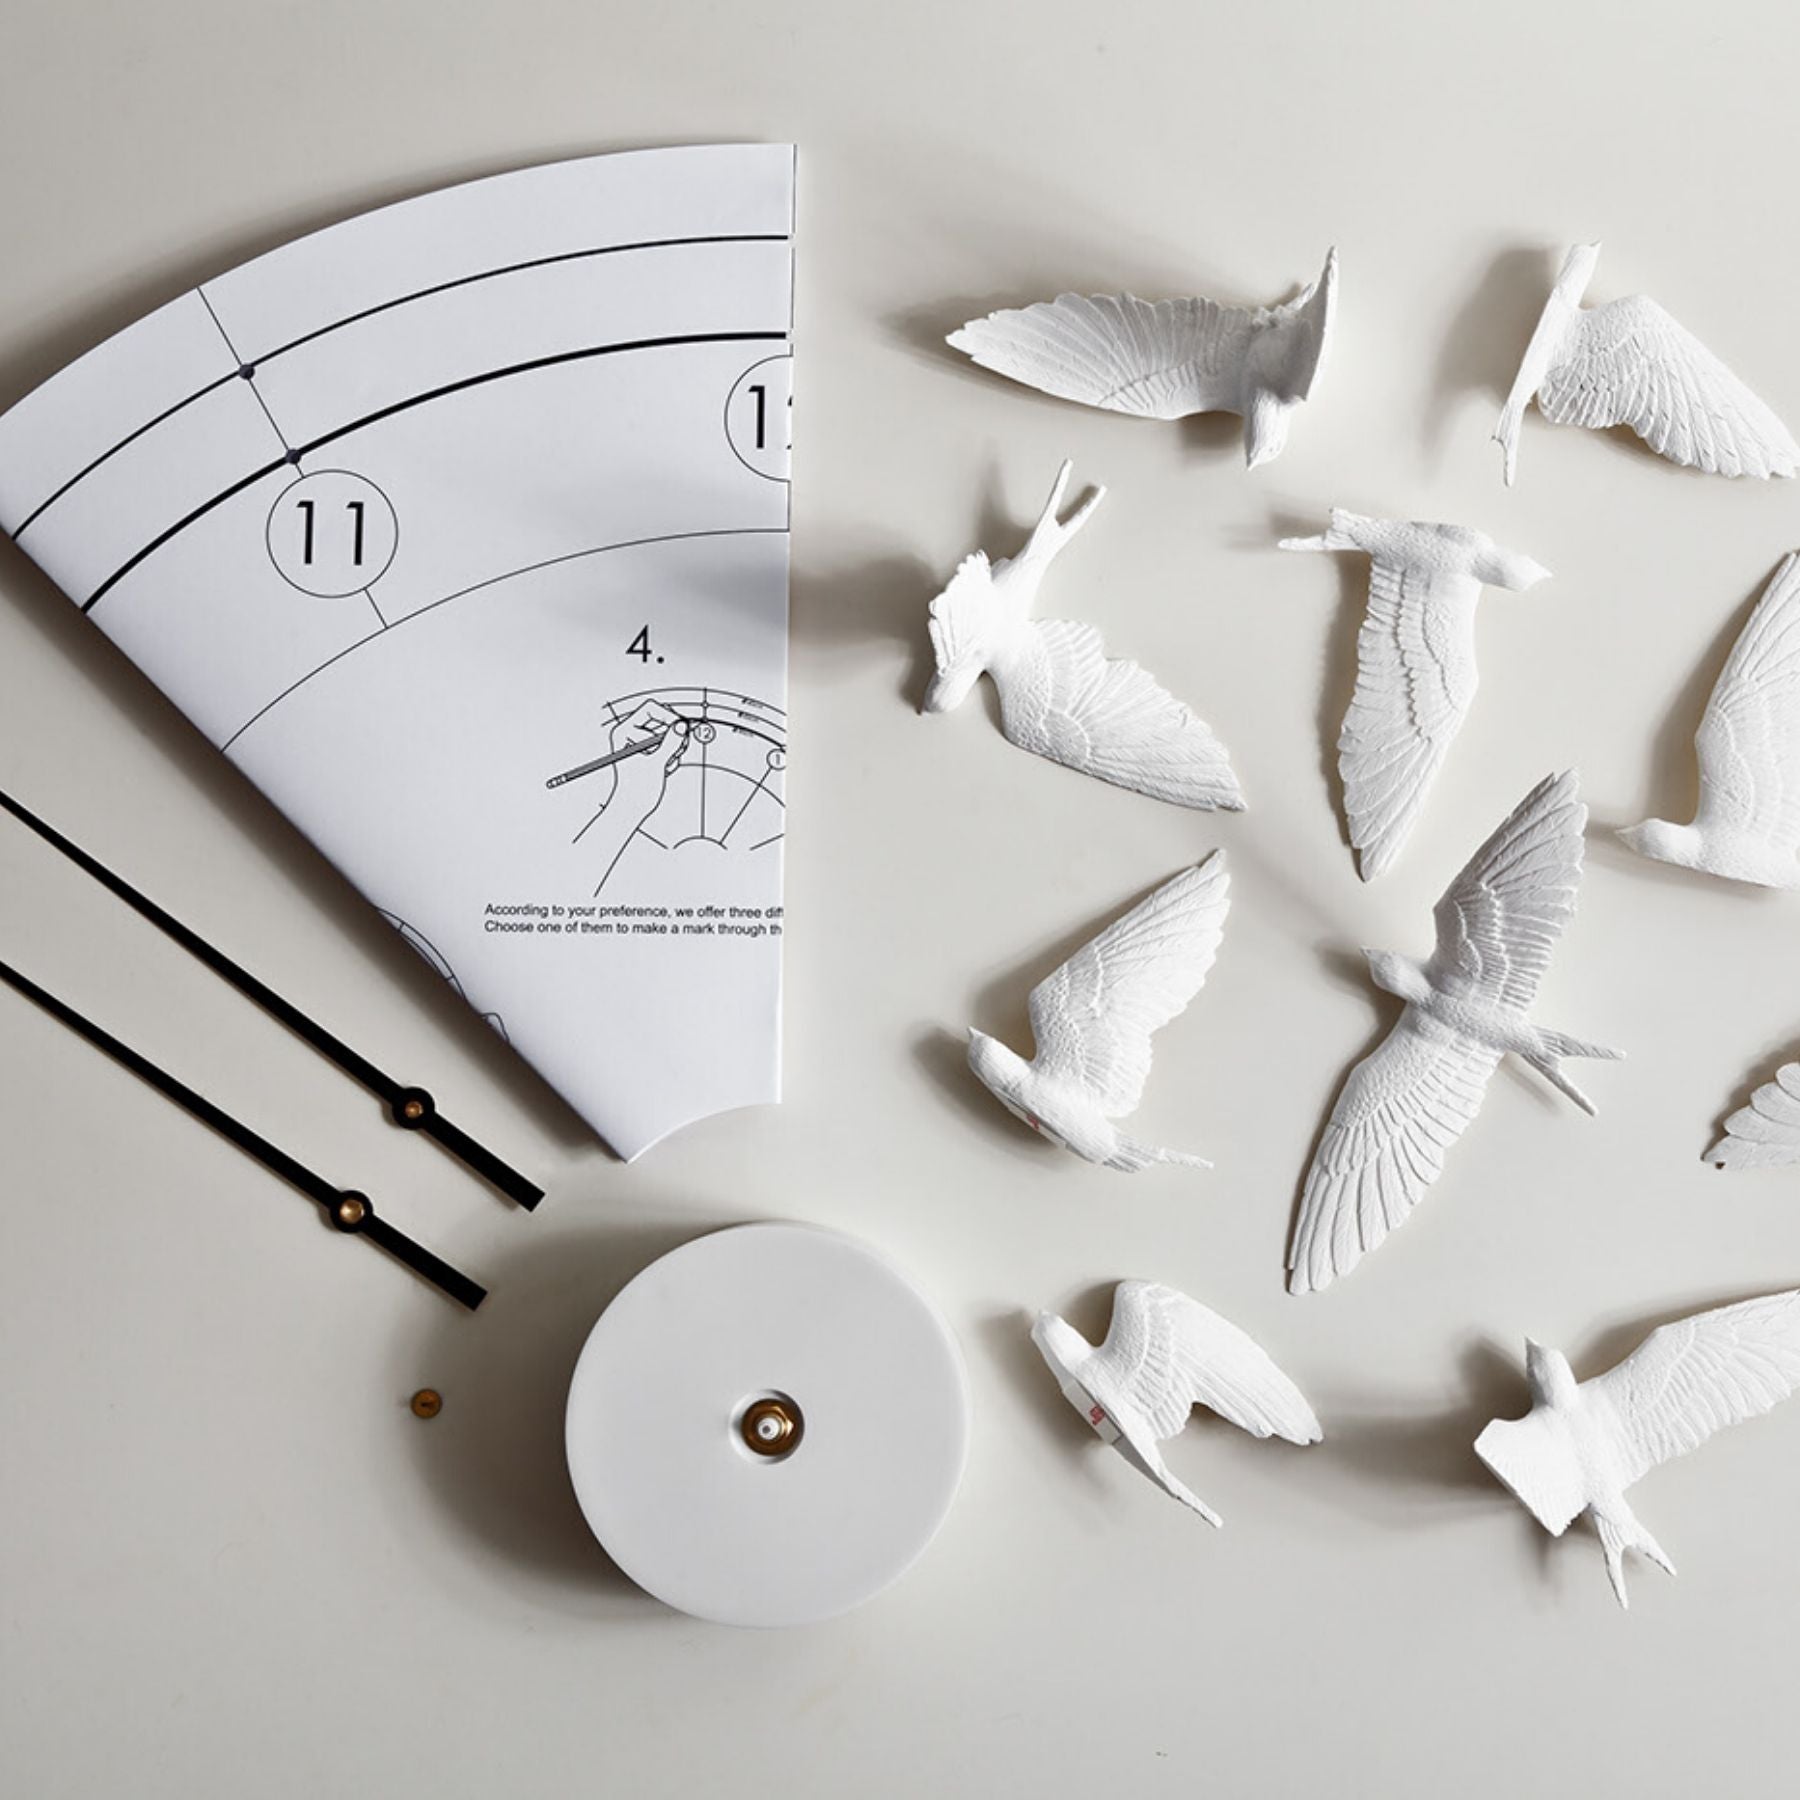 Bird Wall Clock It in the sky and home literally represent freedom